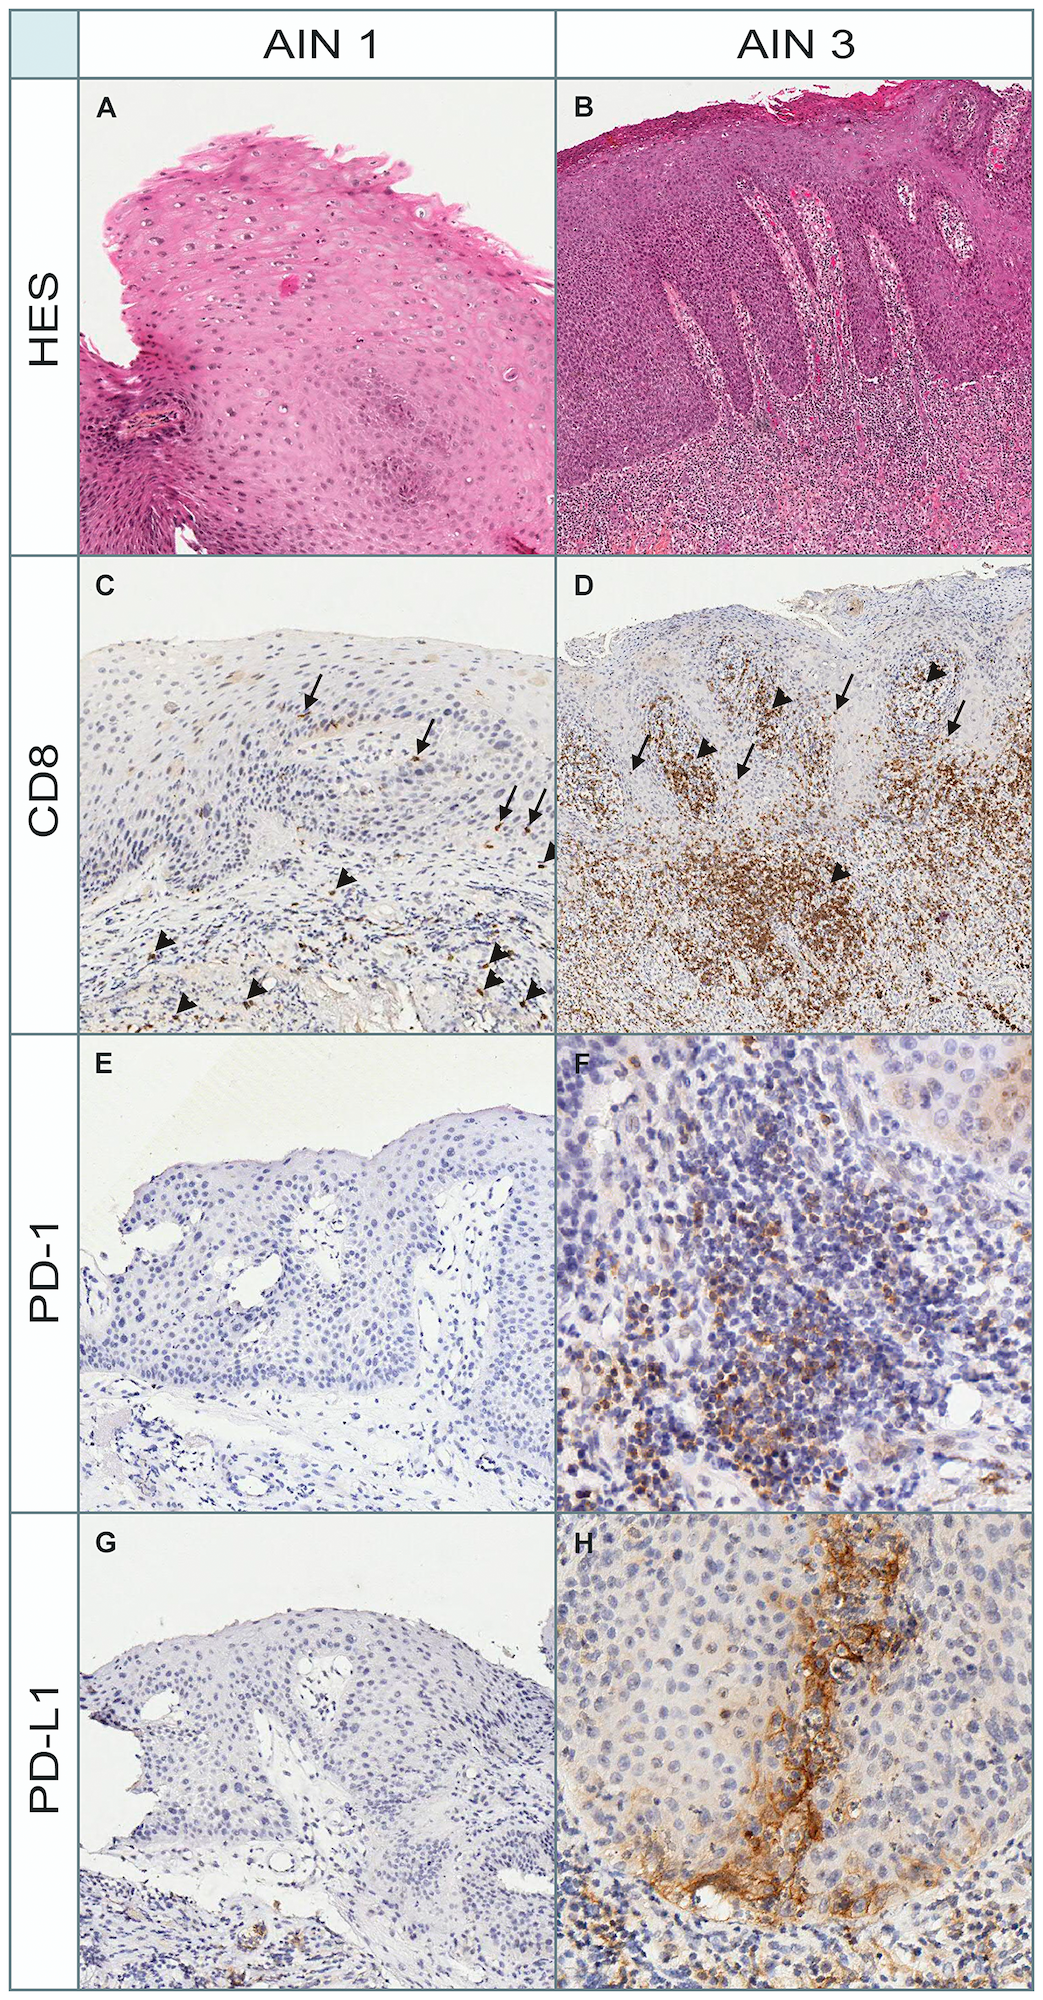 Figure 4: Morphological and immunohistochemical (PD-1, PD-L1, and CD8) aspects in a patient with AIN1 and AIN3.